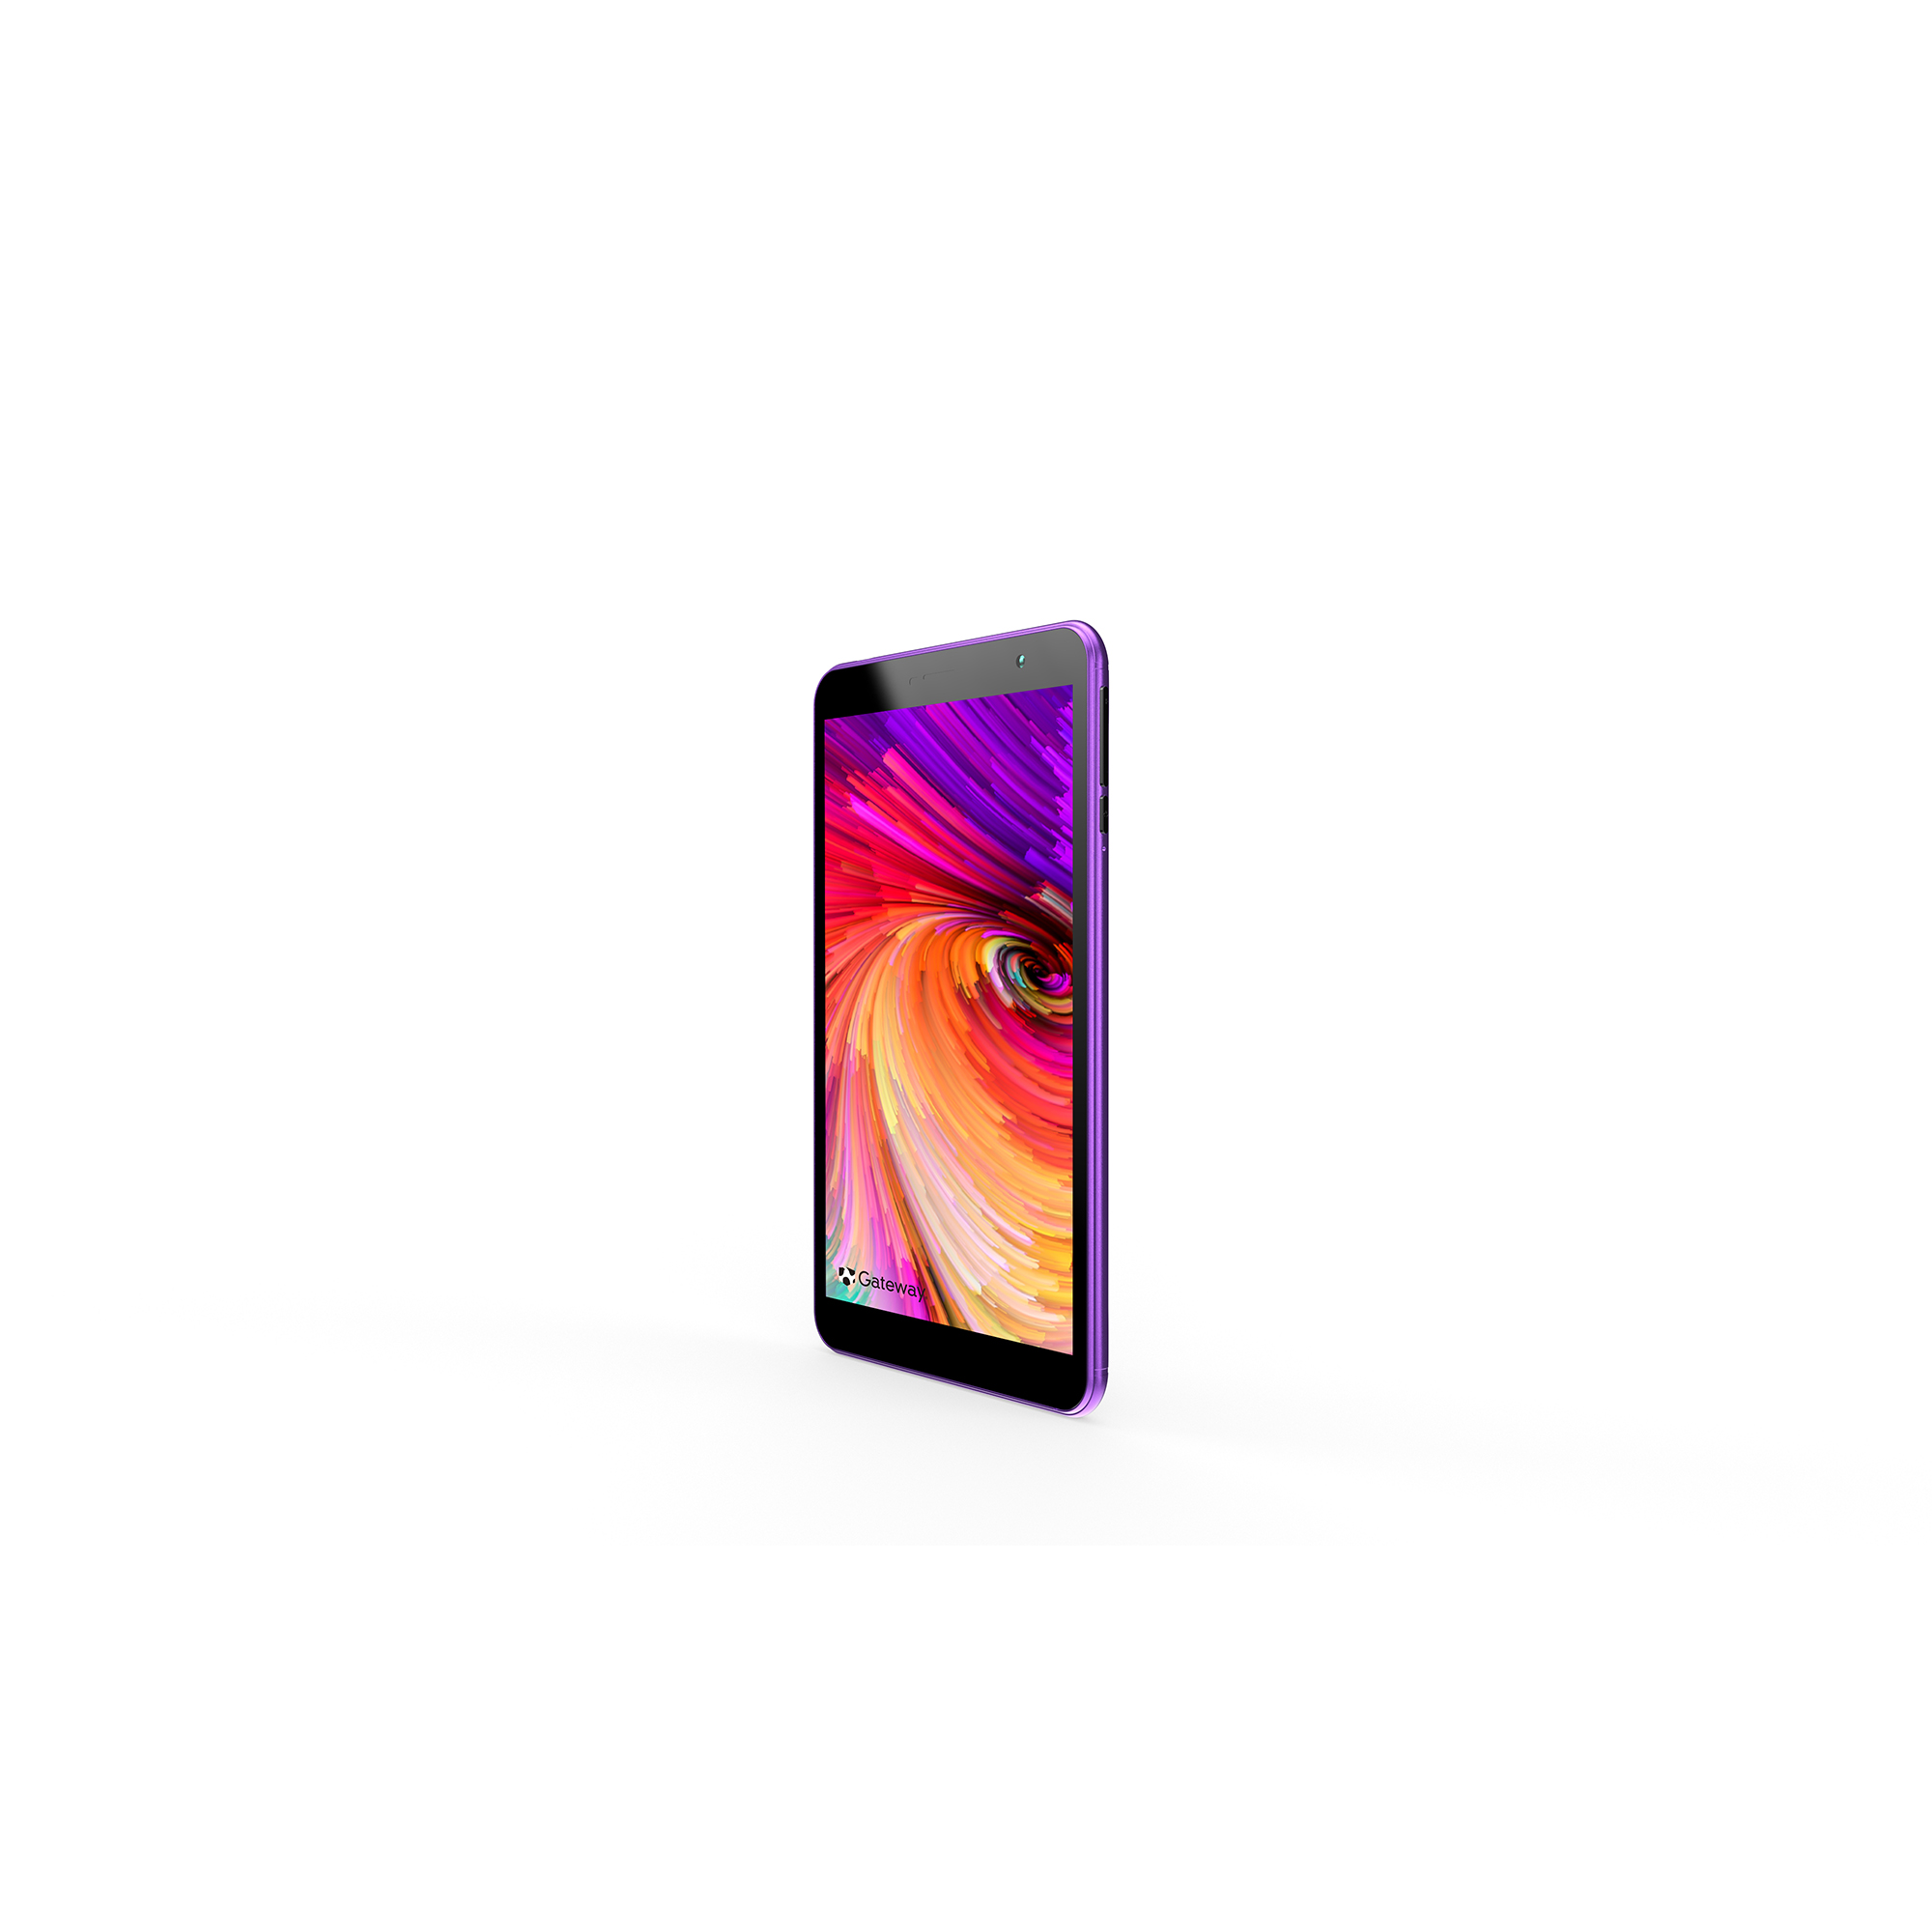 Gateway 8” Tablet, Quad Core, 32GB Storage, 2GB Memory, 0.3MP Front Camera, 2MP Rear Camera, USB-C, Sound ID, Android 10 Go Edition, Purple - image 3 of 5